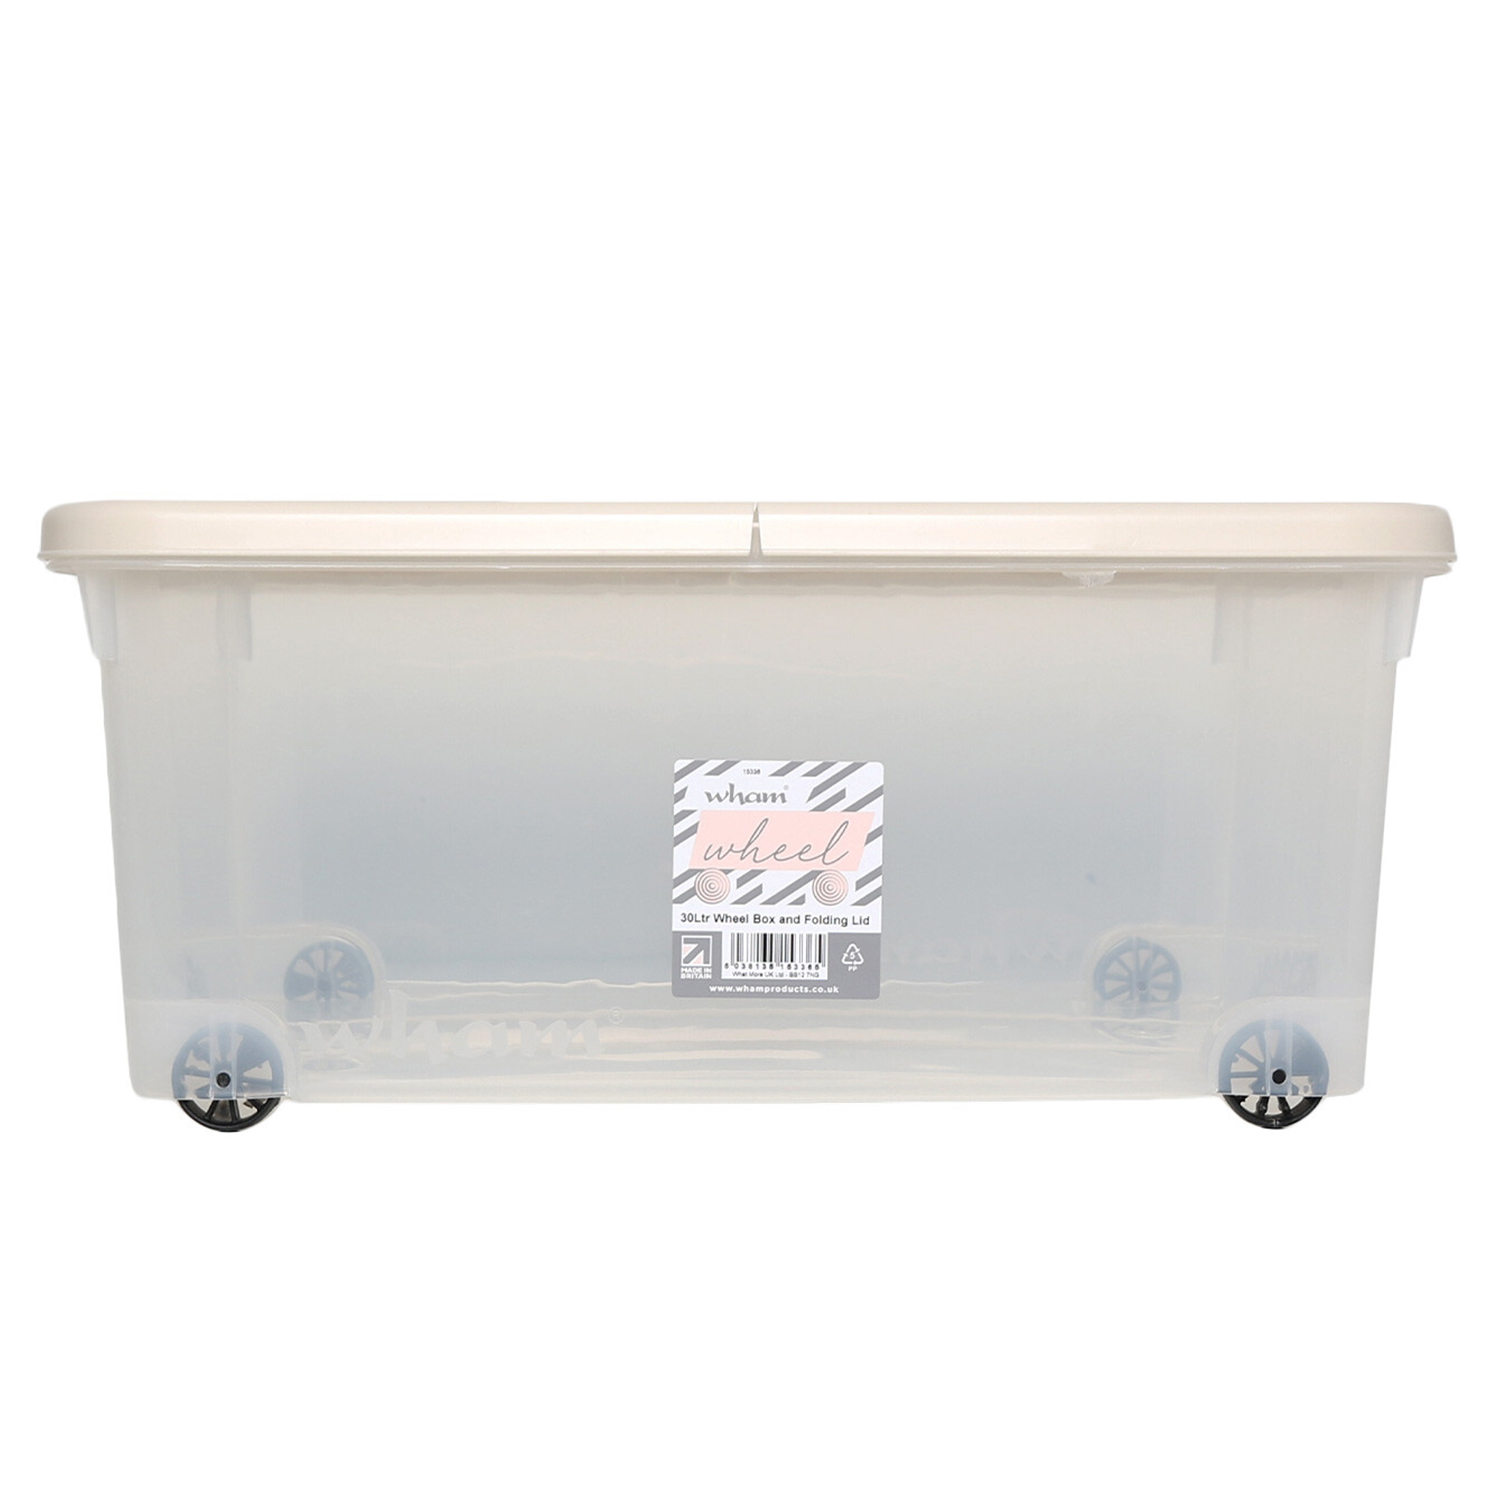 Wham Wheel Perfectly Pale Storage Box and Folding Lid 30L Image 1